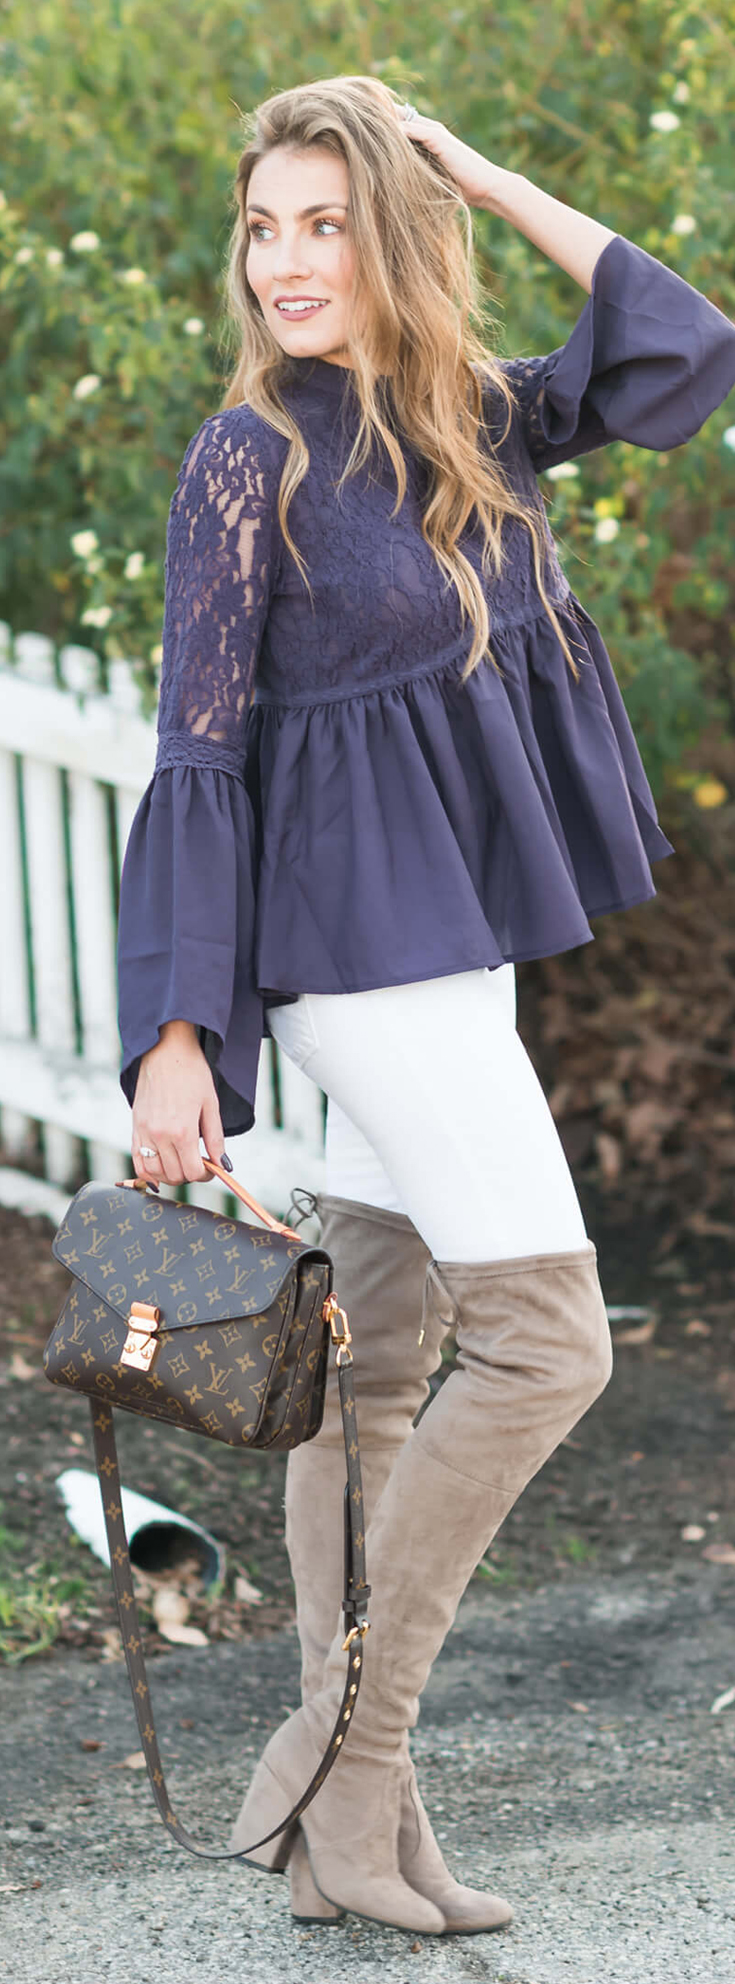 Winter Outfit I love: Blue Lace Peplum top, White Skinny Jeans, Steve Madden Over the knee boots, and Louis Vuitton Pochette Metis. Angela Lanter - Hello Gorgeous.